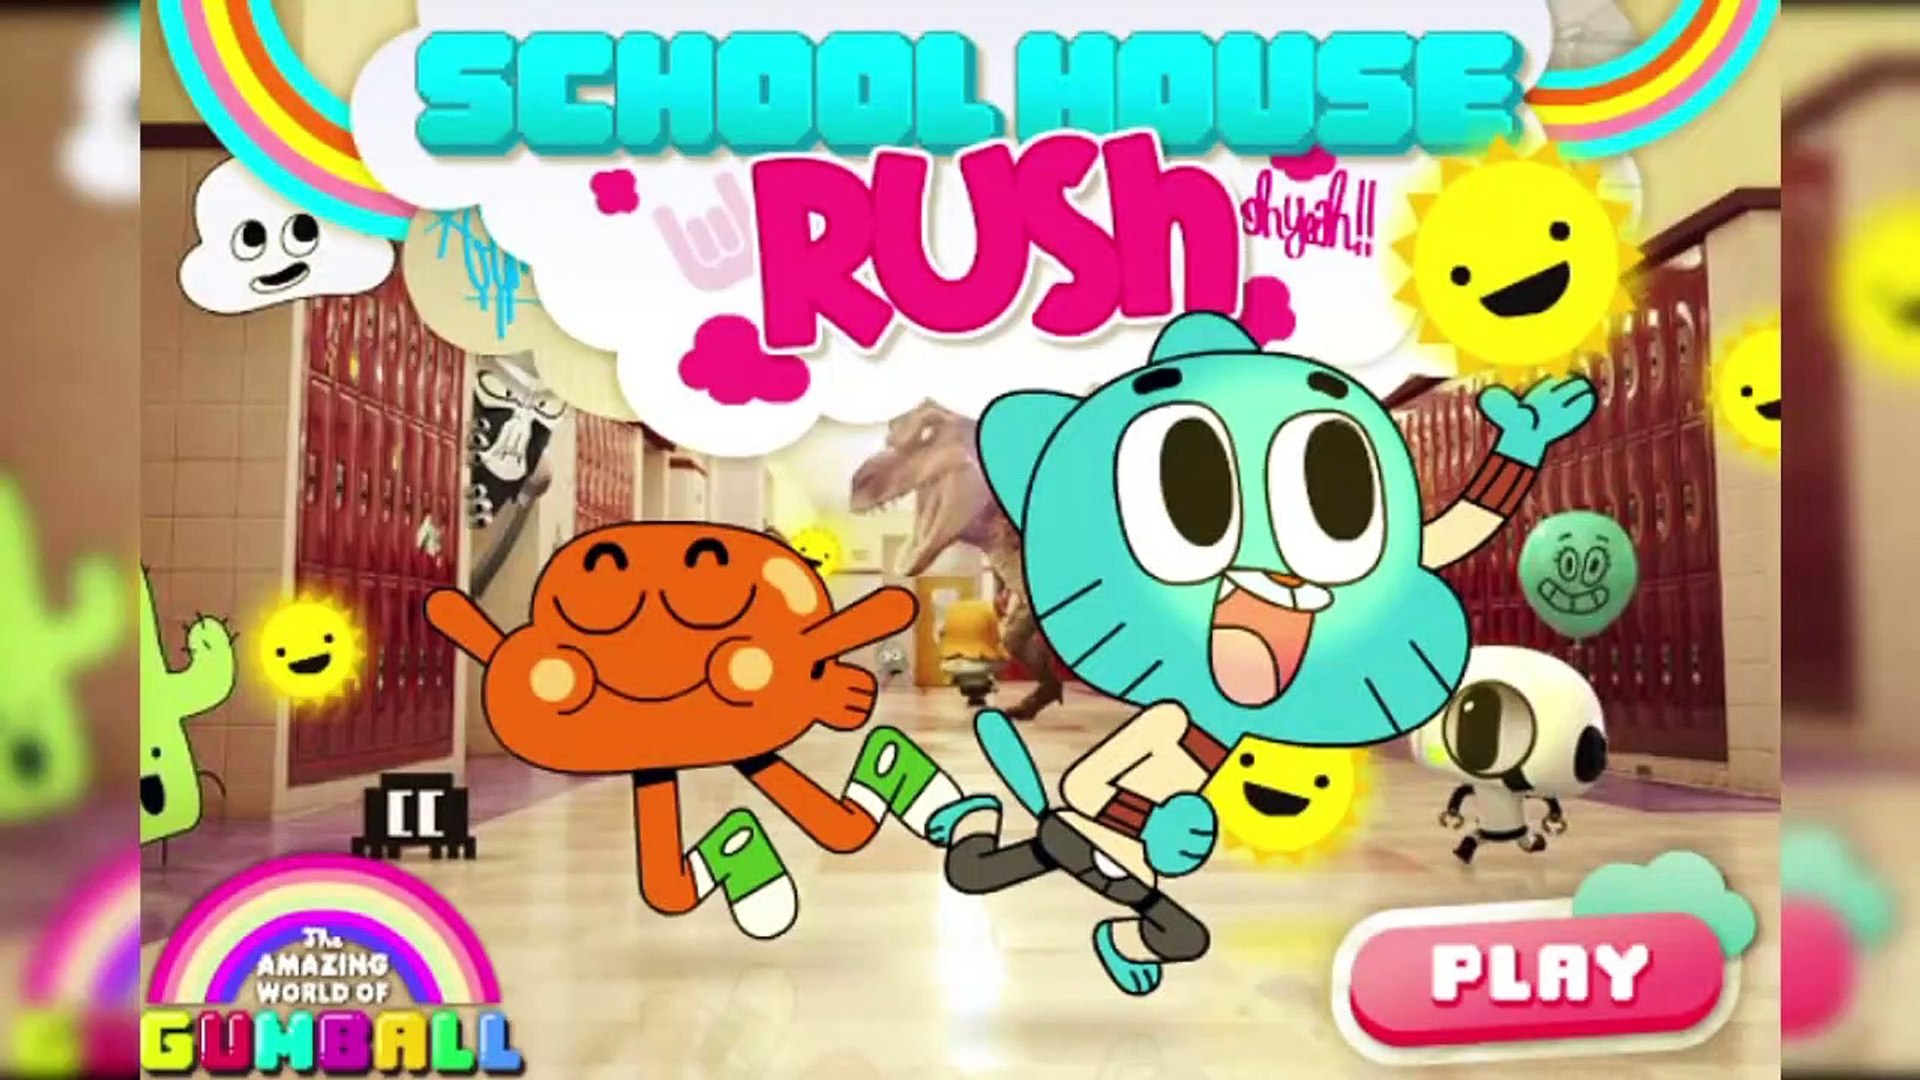 Cartoon Network Games The Amazing World of Gumball School House Rush cartoon  network games - video Dailymotion